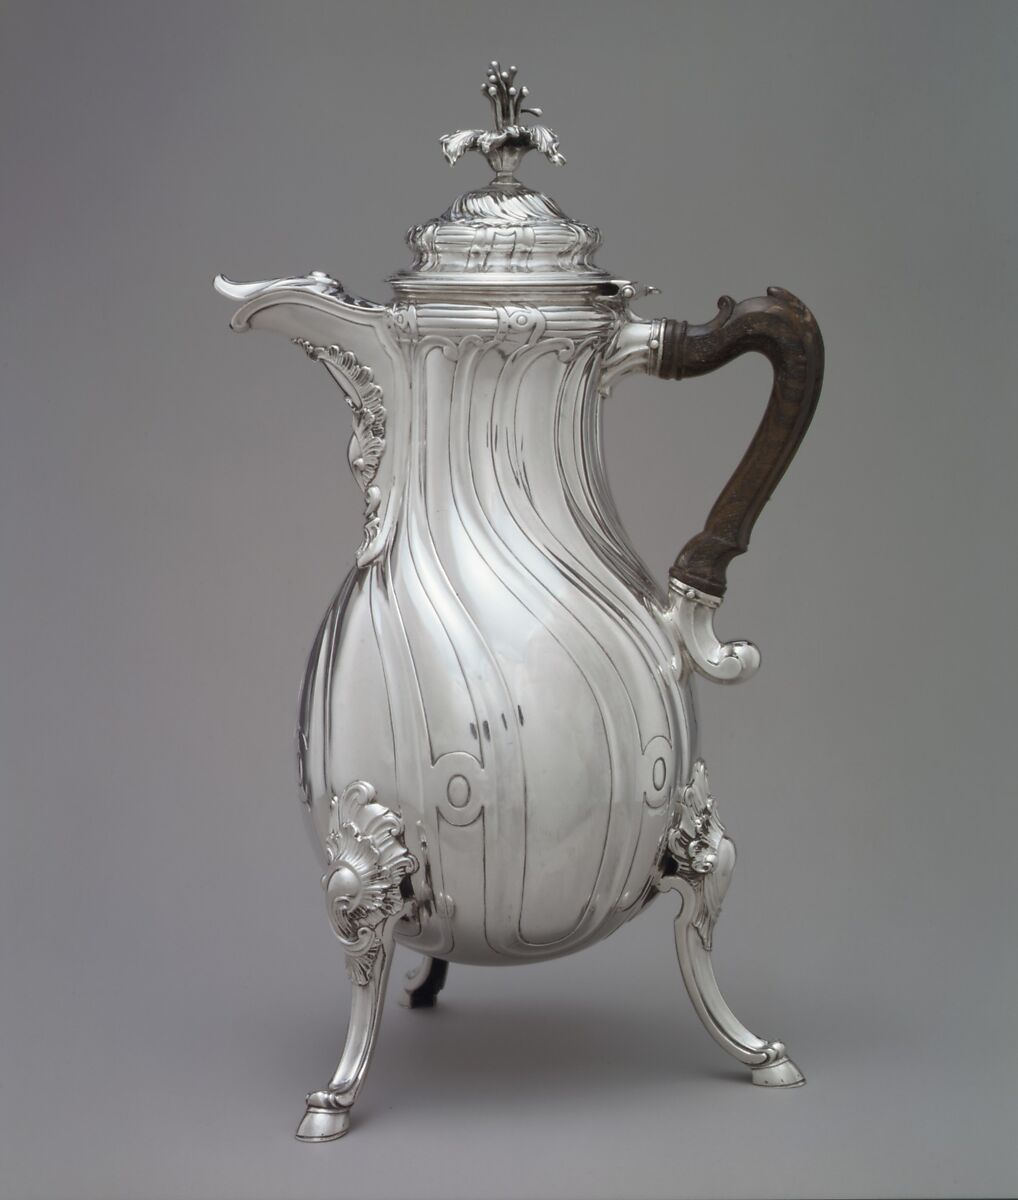 Coffeepot, Master with the Mark of a Crowned D, Silver, wood, Flemish, Mons 